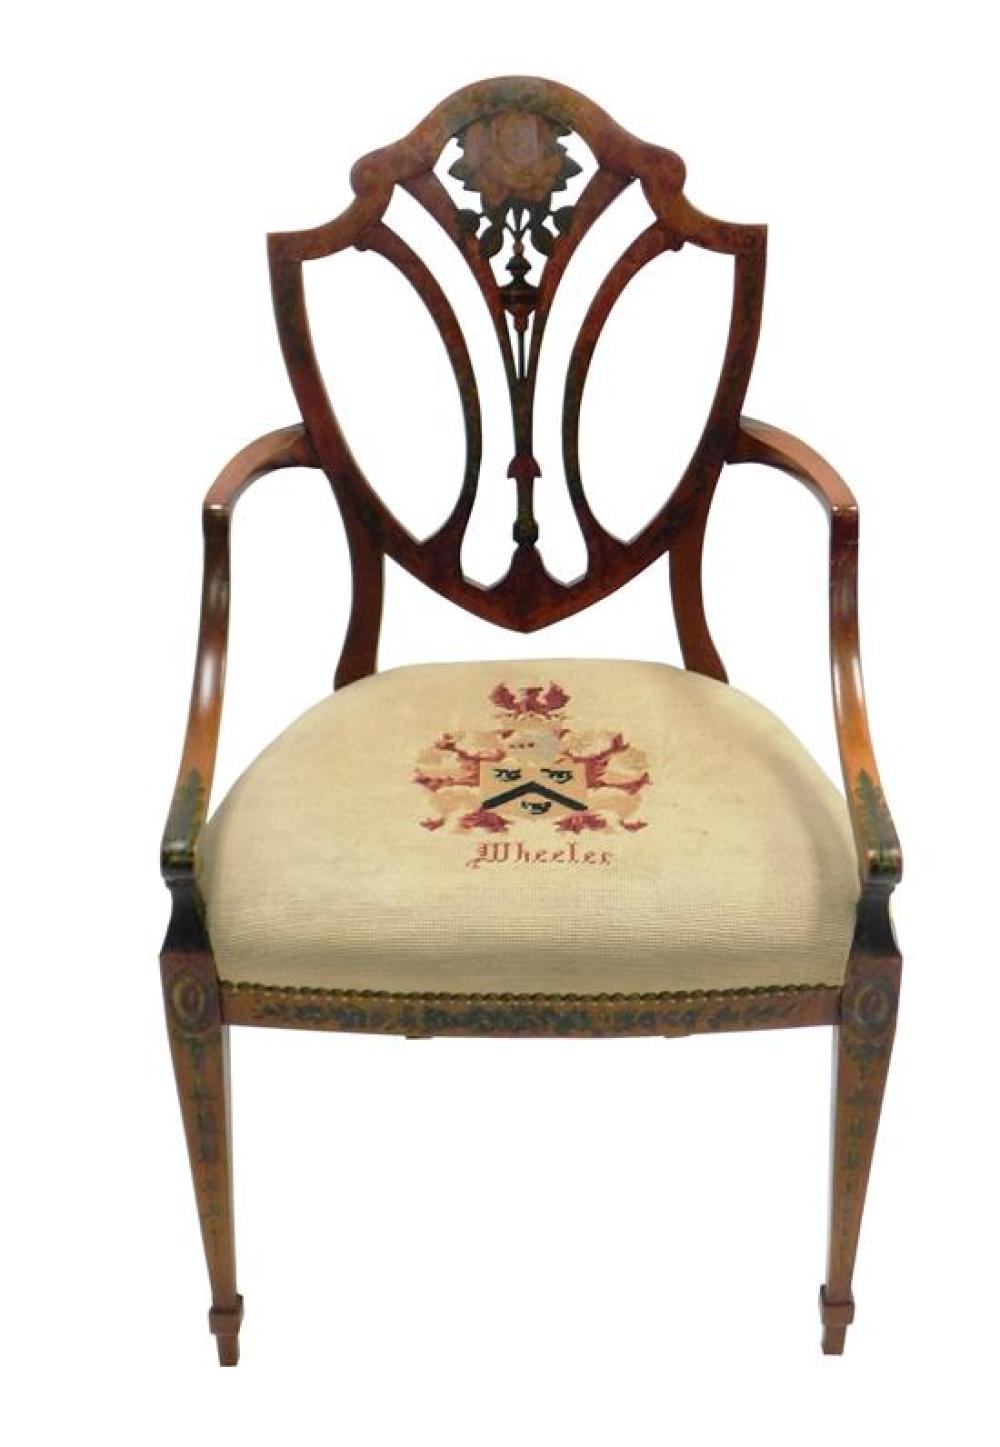 EDWARDIAN OPEN ARMCHAIR WITH PAINTED